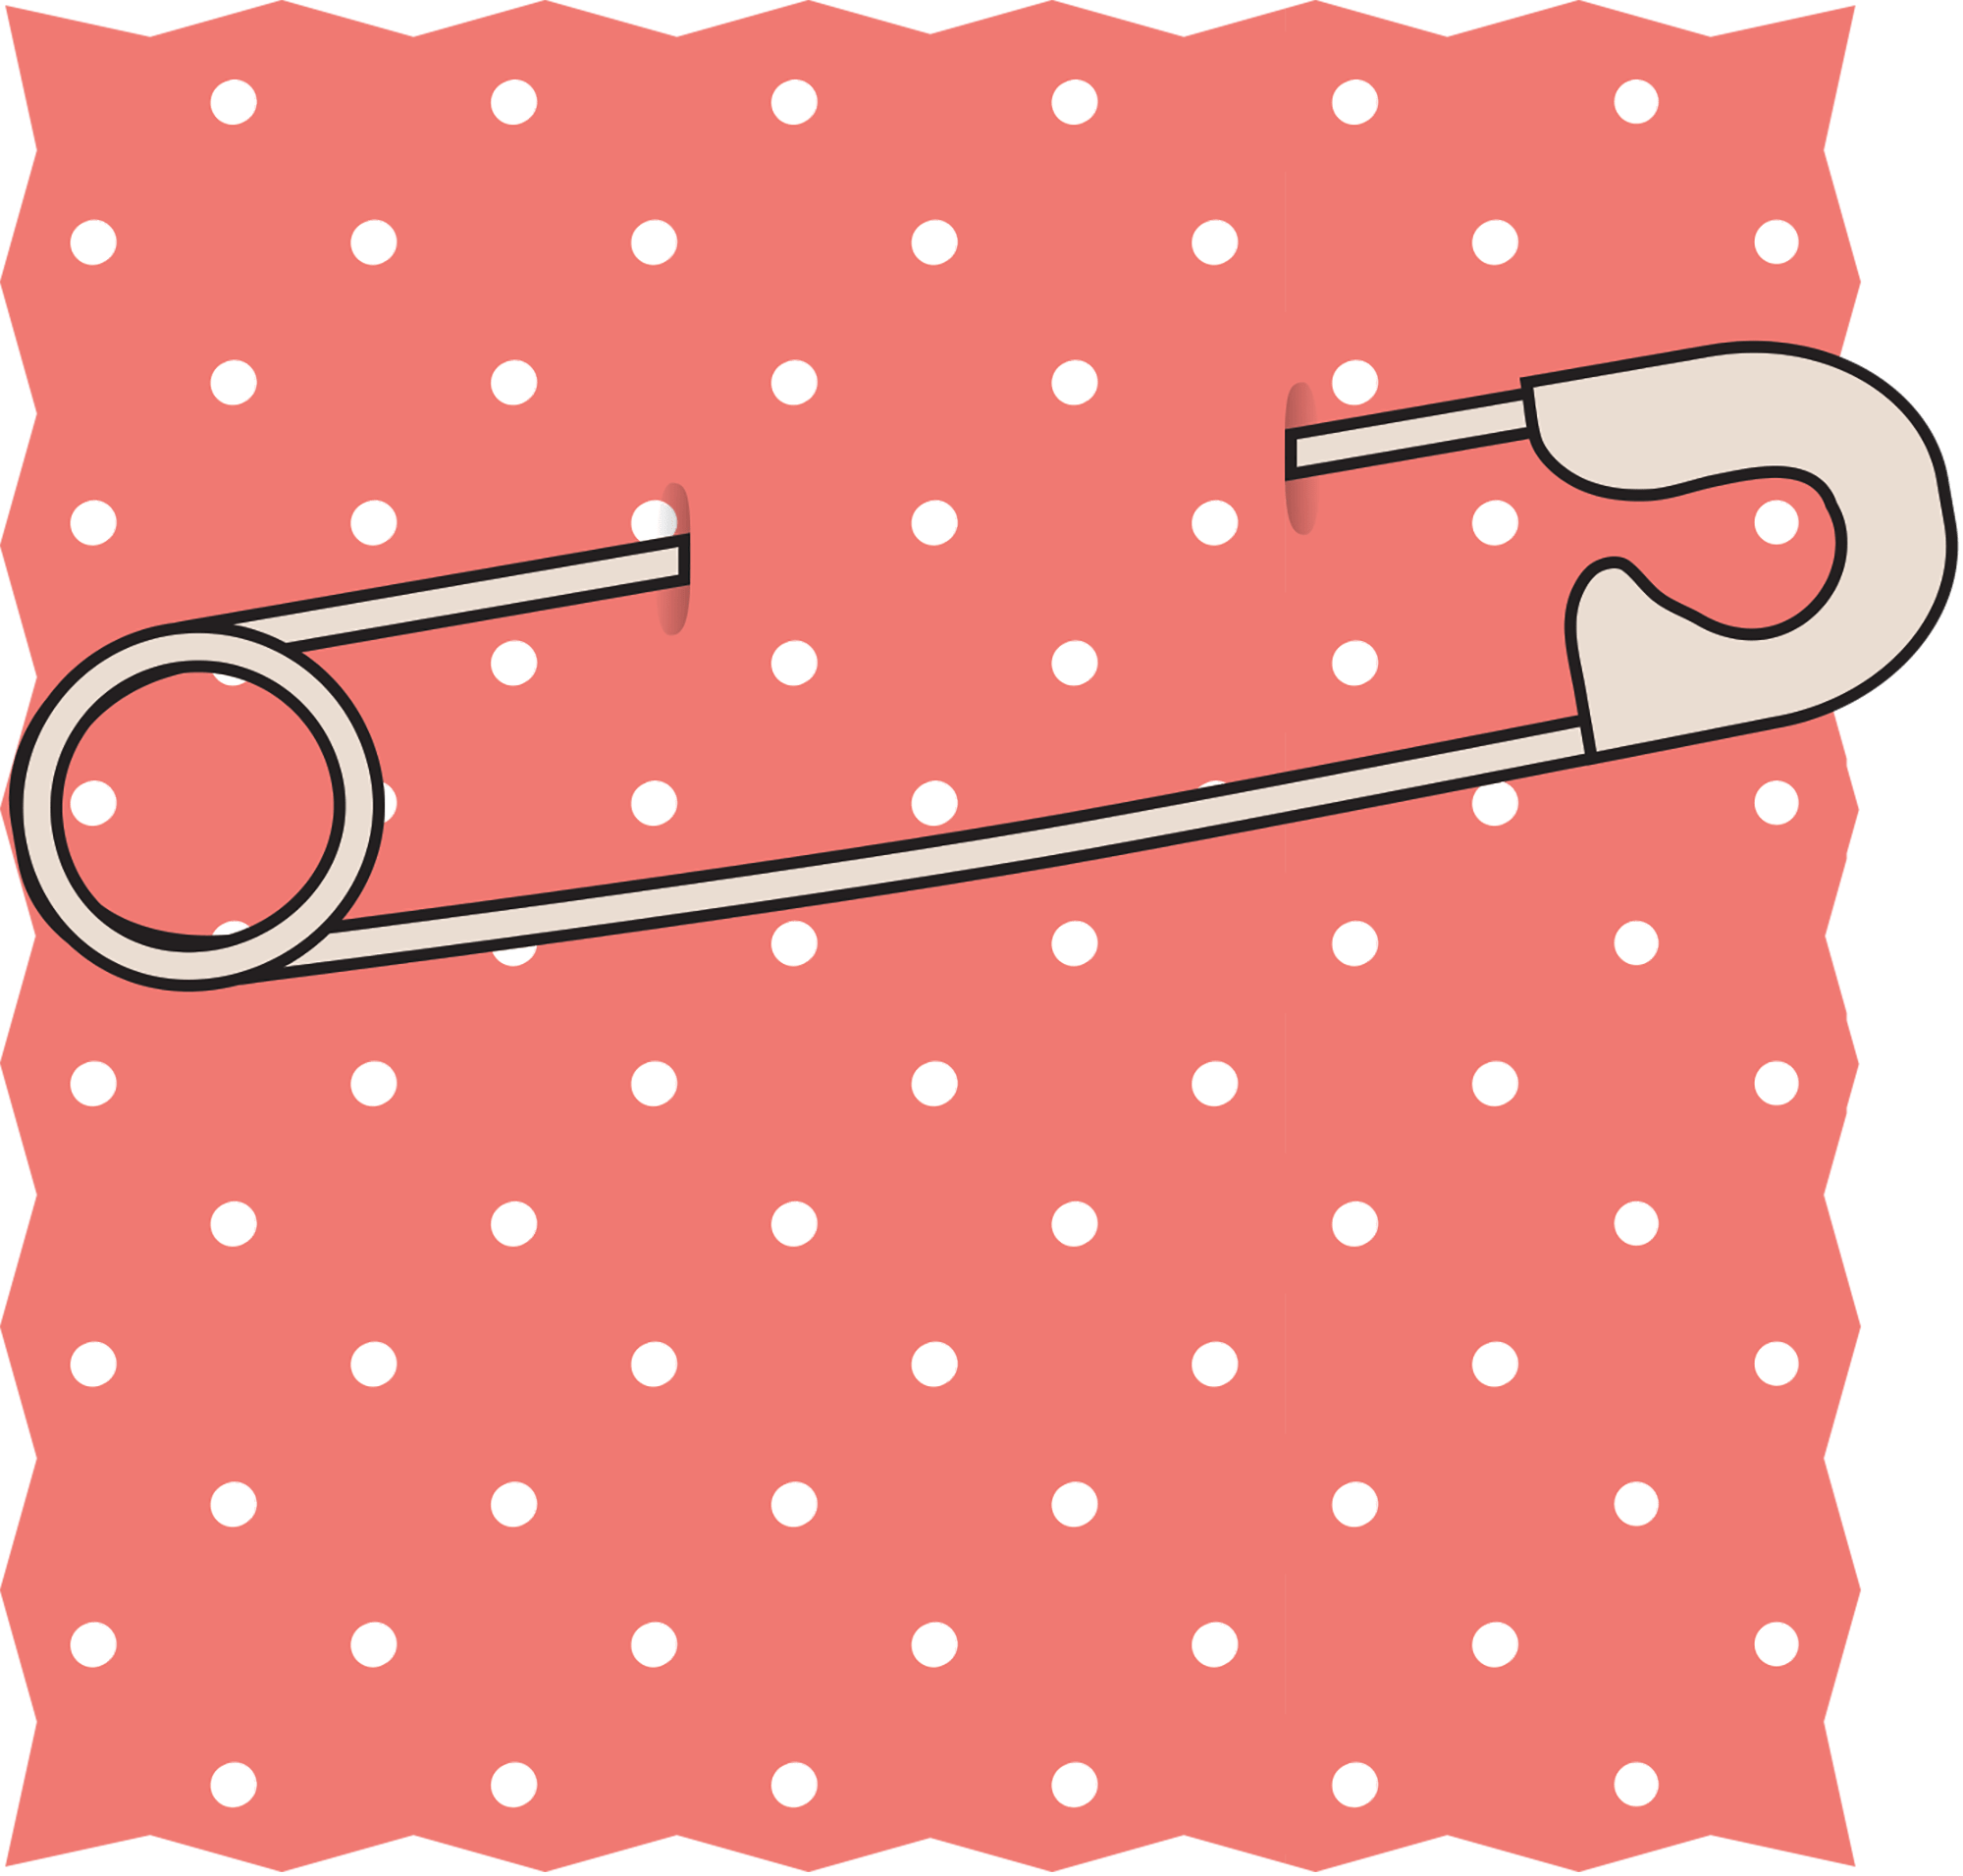 Dotted Material With Safety Pin - Sewing Needle (2000x1911)